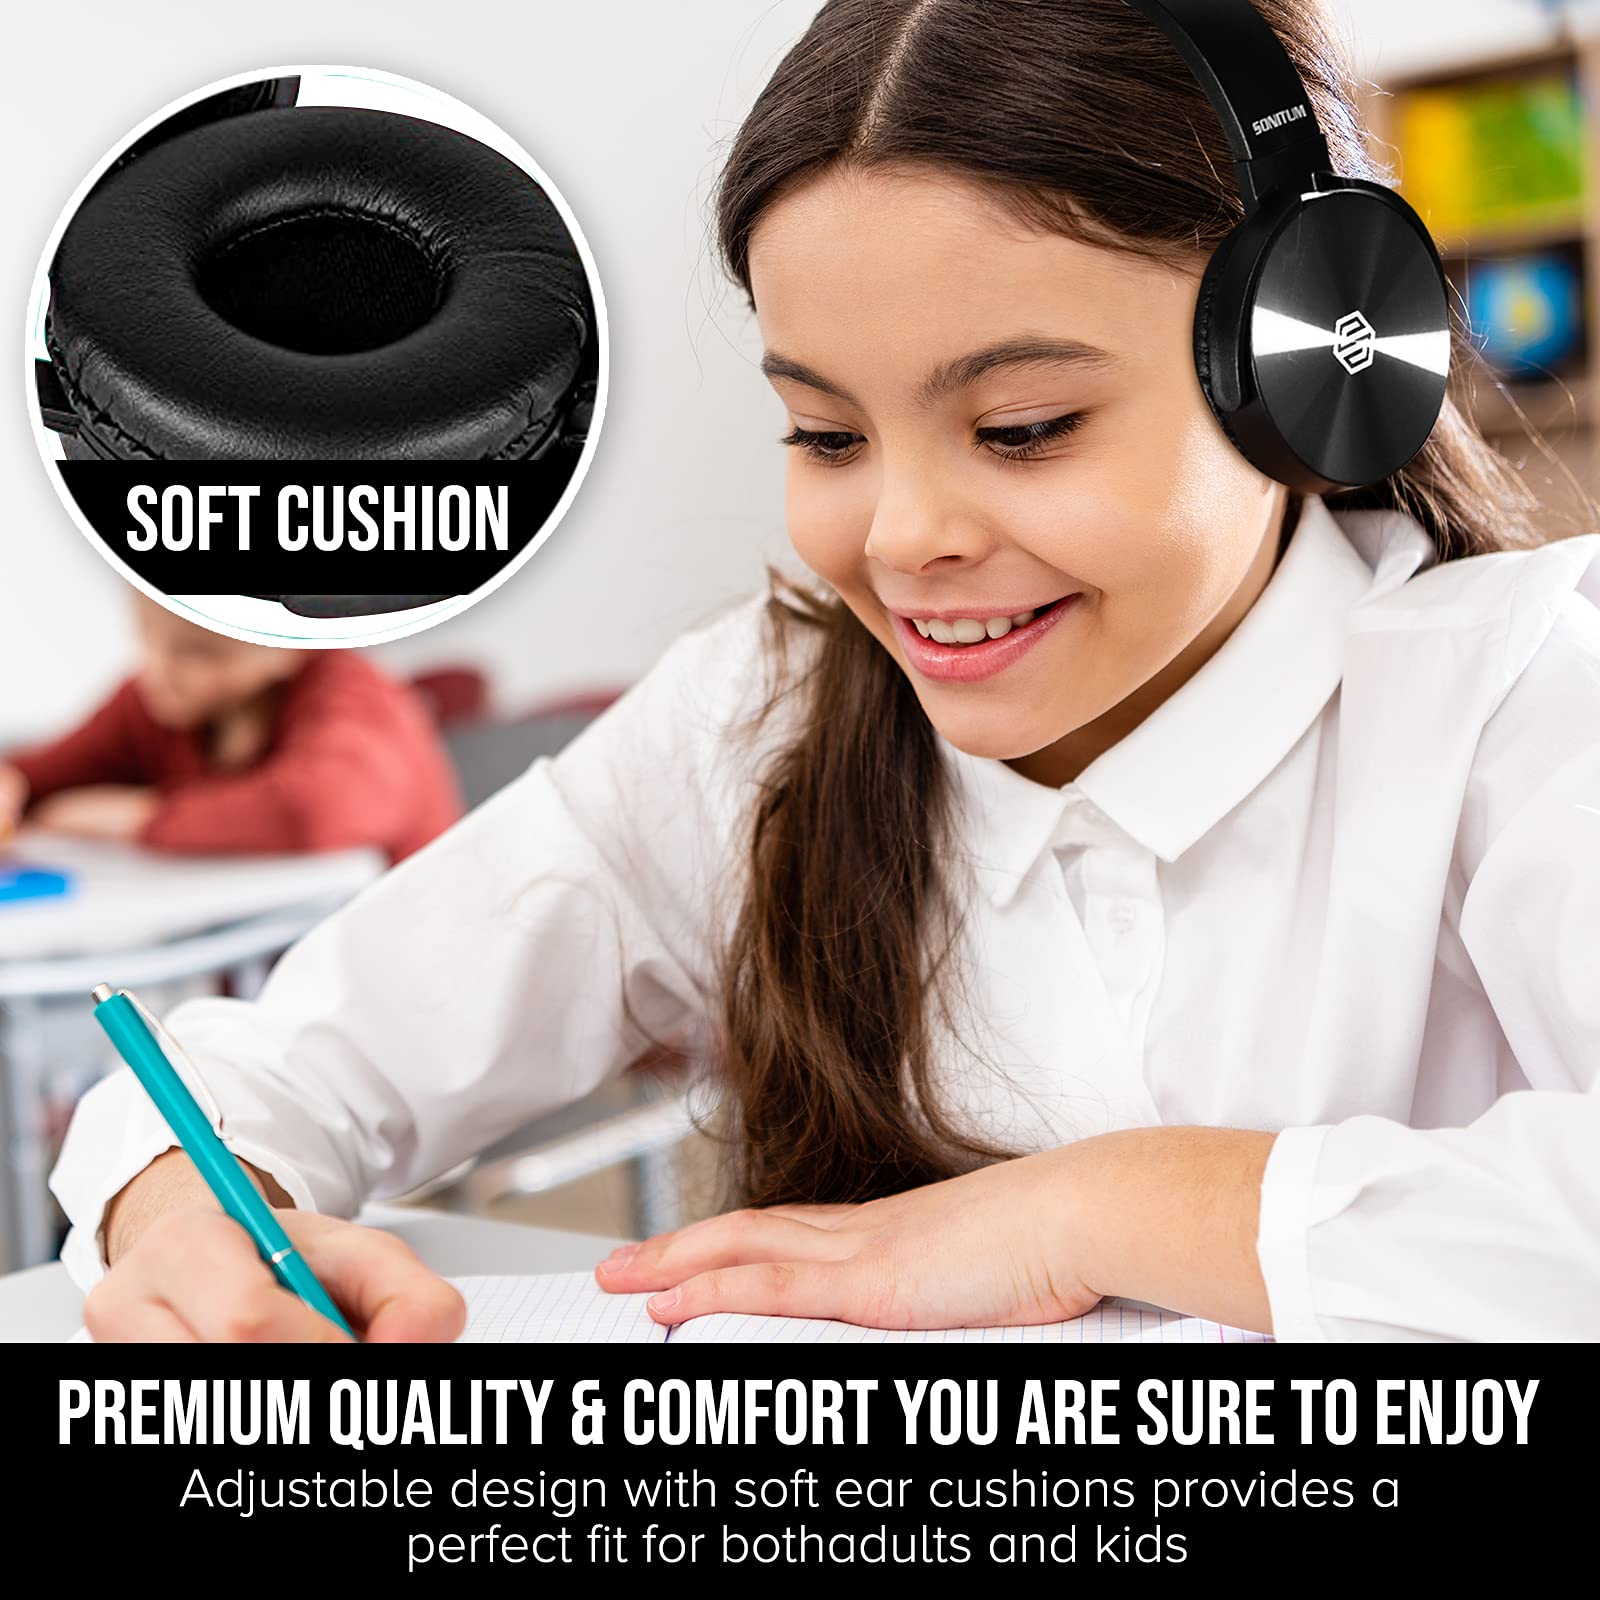 Classroom Headphones with Microphone Bulk 10-Pack, Student On Ear Comfy Swivel Earphones for Library, School, Airplane, Online Learning and Travel, HQ Stereo Sound 3.5mm Jack  - Like New